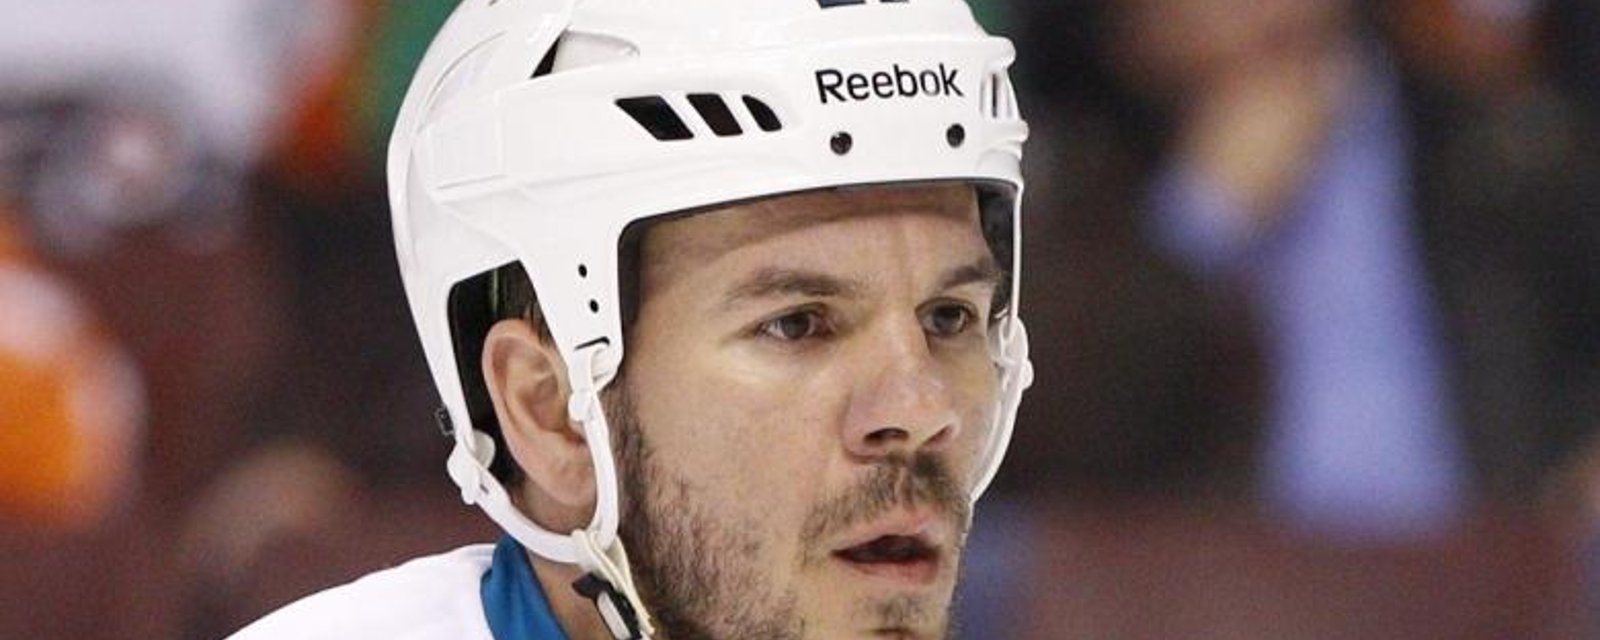 NHL veteran announces his retrenchment after 16 seasons in the NHL.